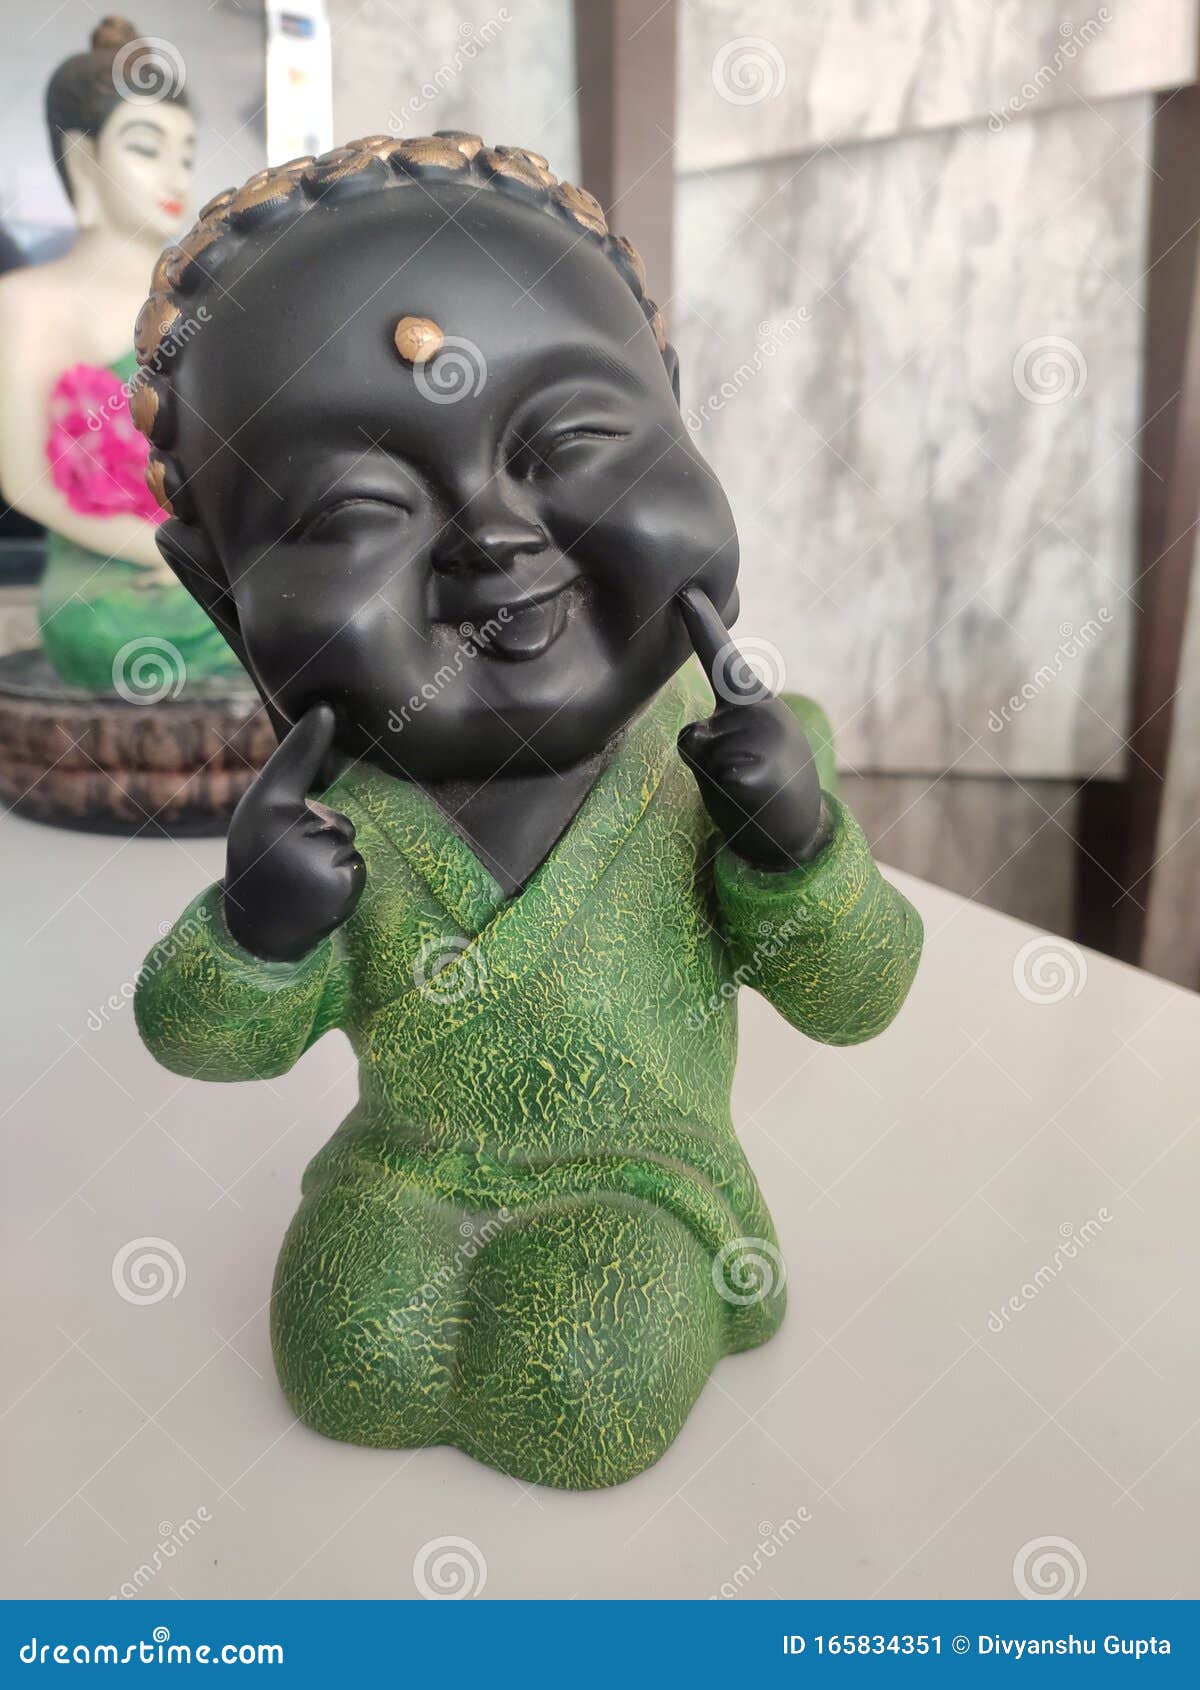 Cute Buddha Monk with a Cute Gesture Stock Image - Image of cute, tree:  165834351